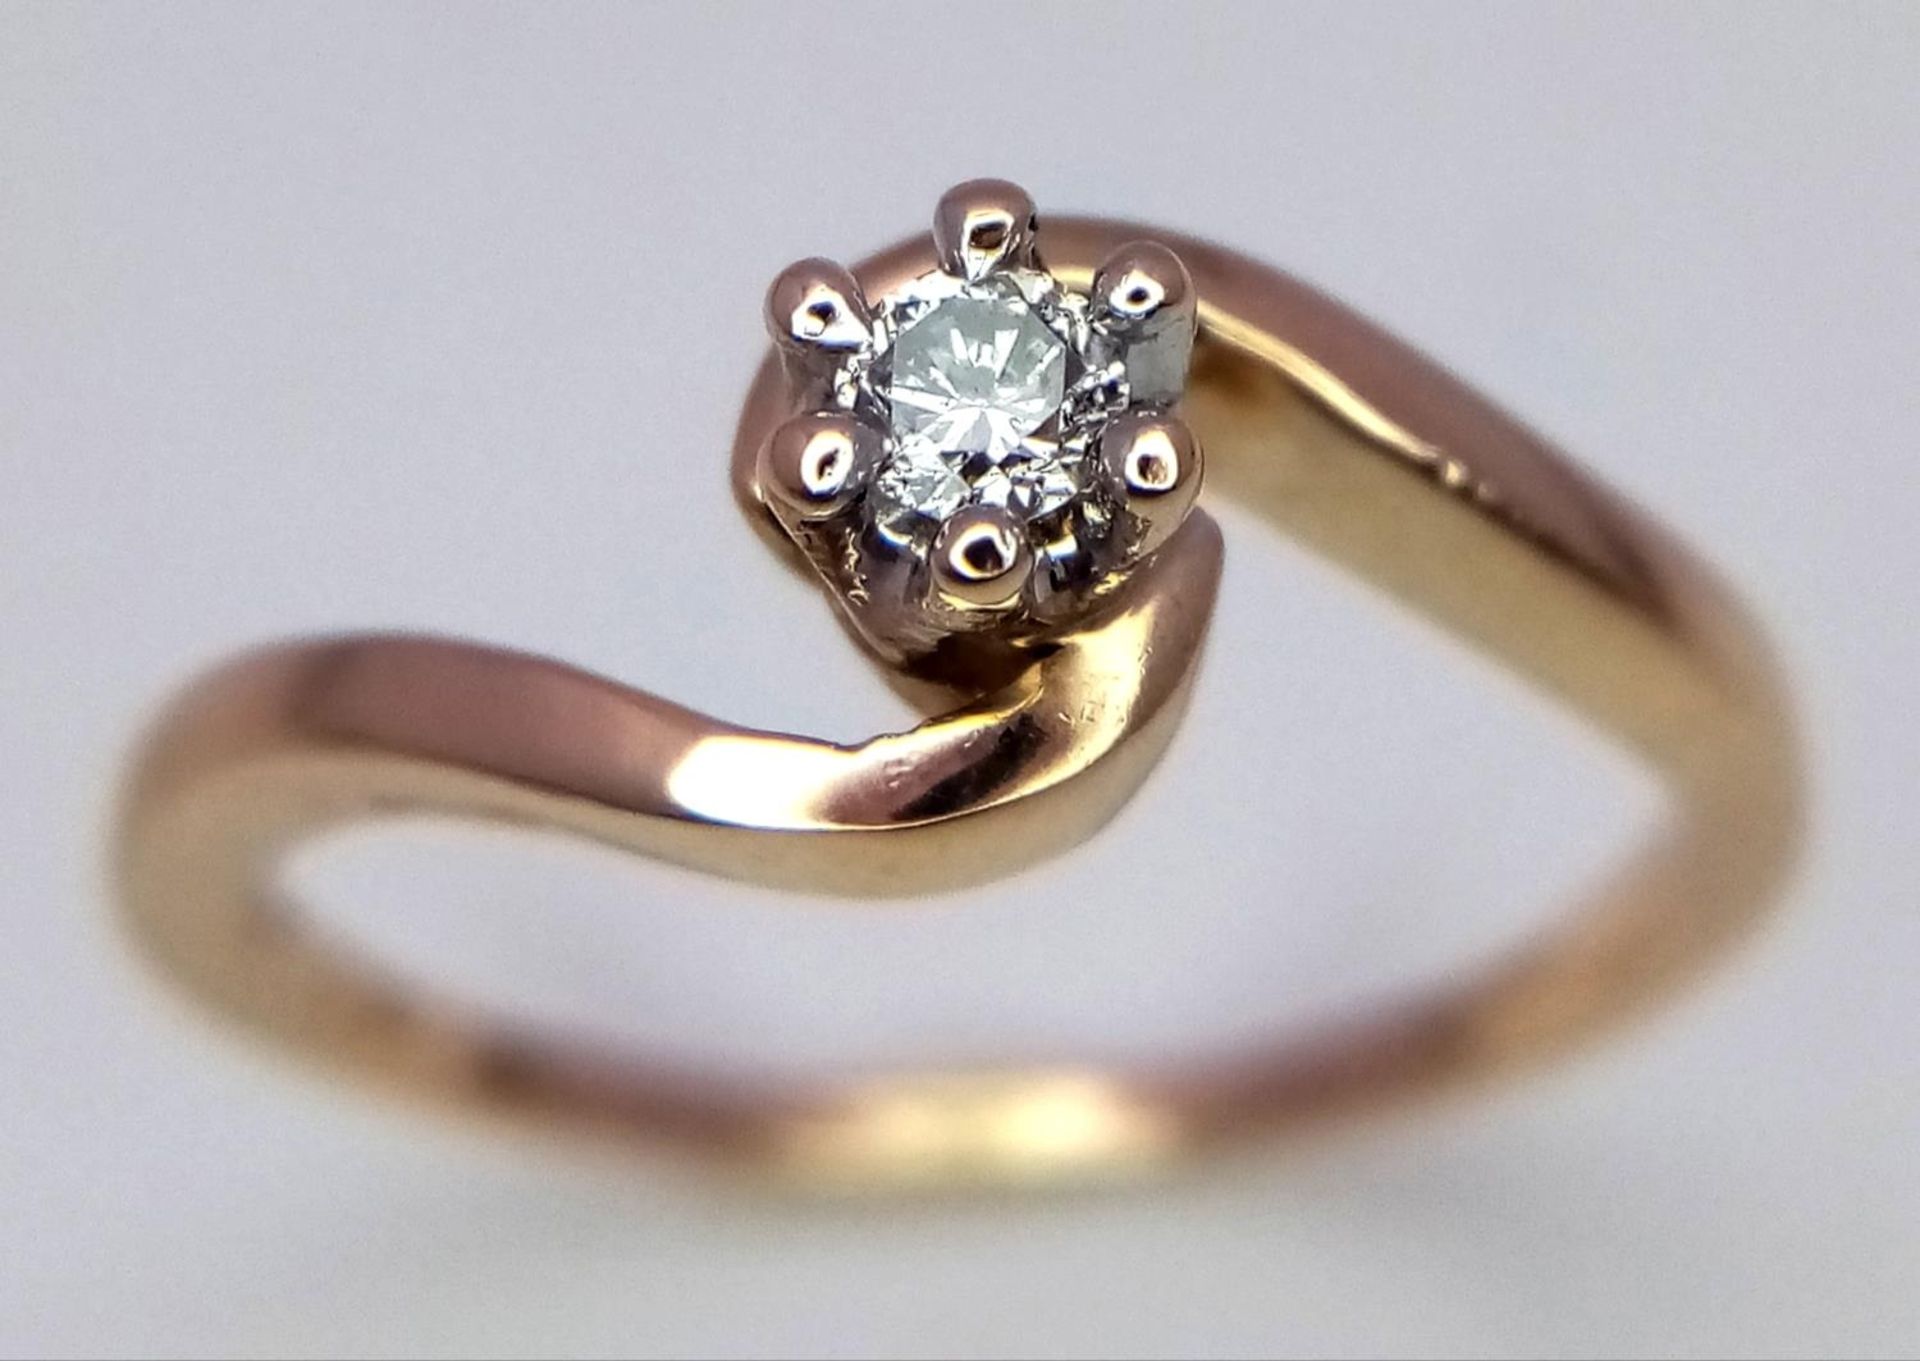 A 9K YELLOW GOLD DIAMOND SOLITAIRE TWIST RING 0.10CT 2G SIZE L SPAS 9021 - Image 2 of 5